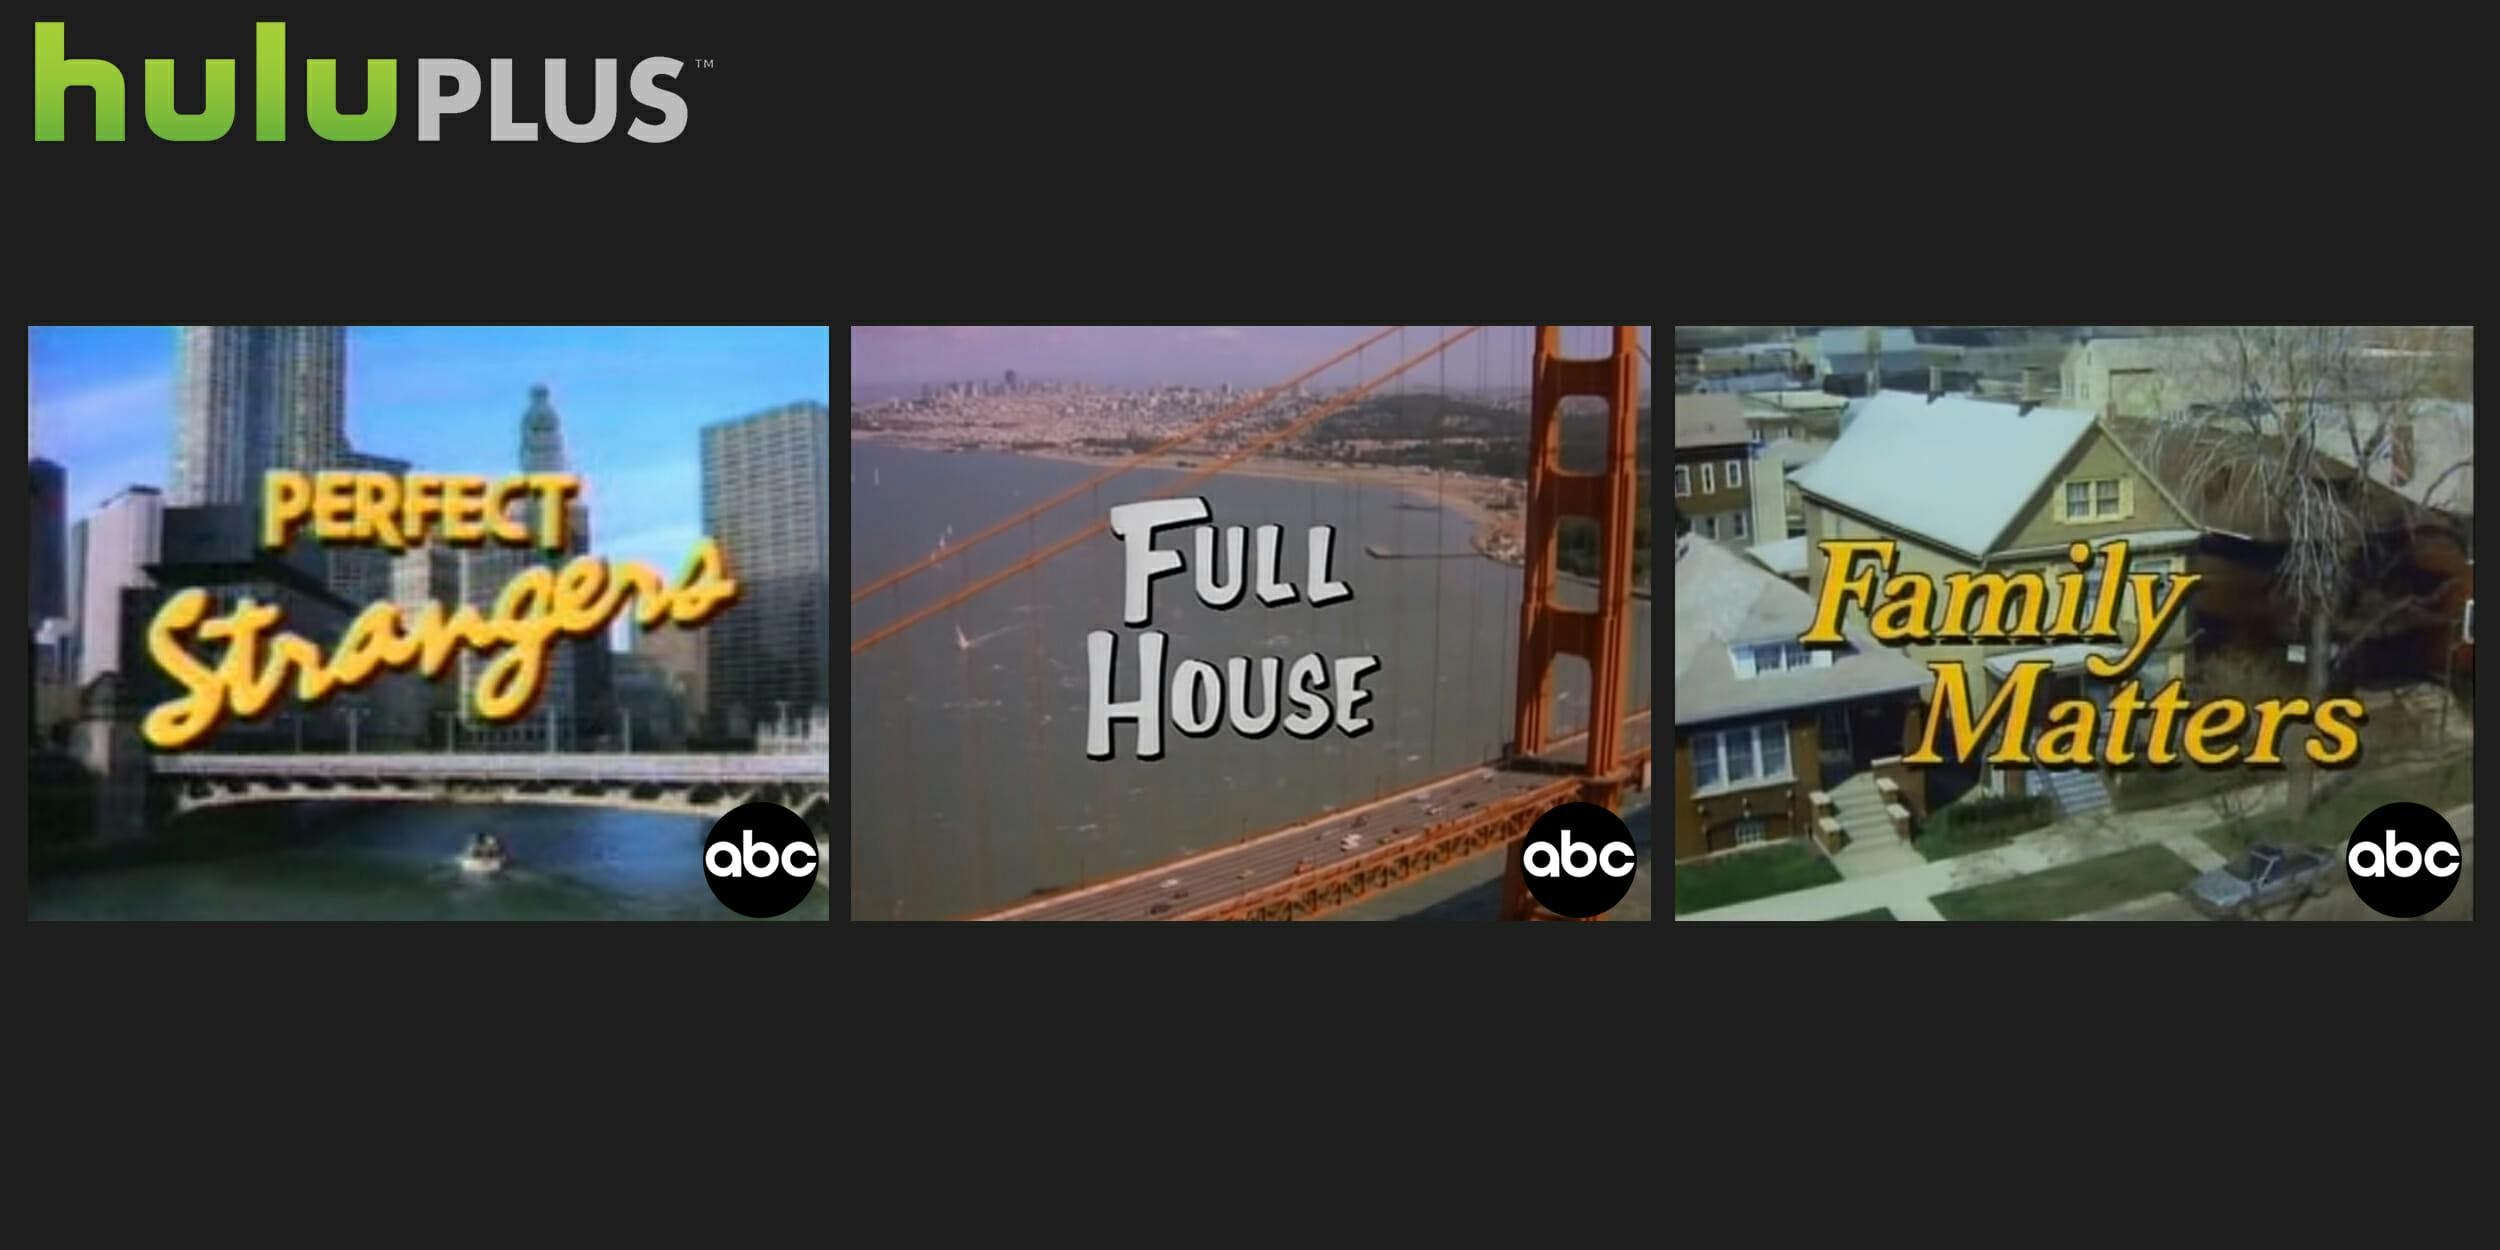 HuluPlus with Perfect Strangers, Full House, and Family Matters